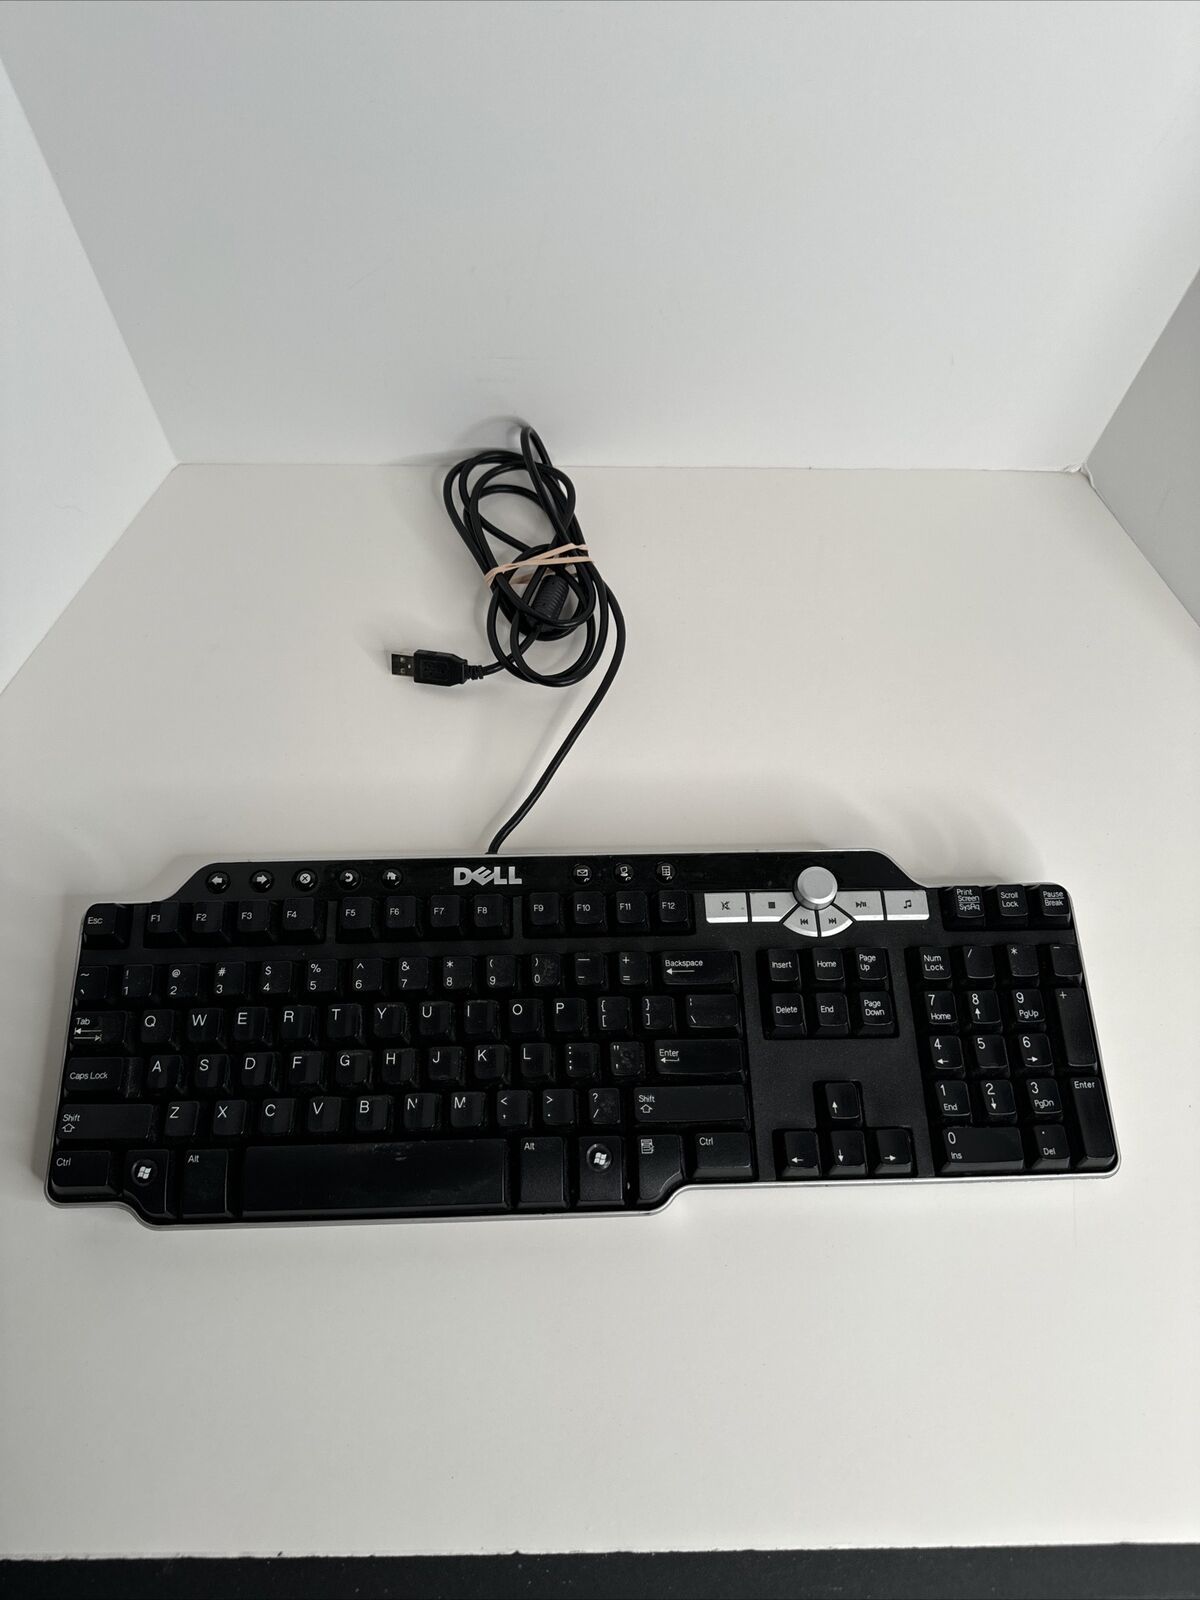 Dell SK-8135 USB  Wired Mechanical Keyboard Black Authentic 2 USB Ports - Tested